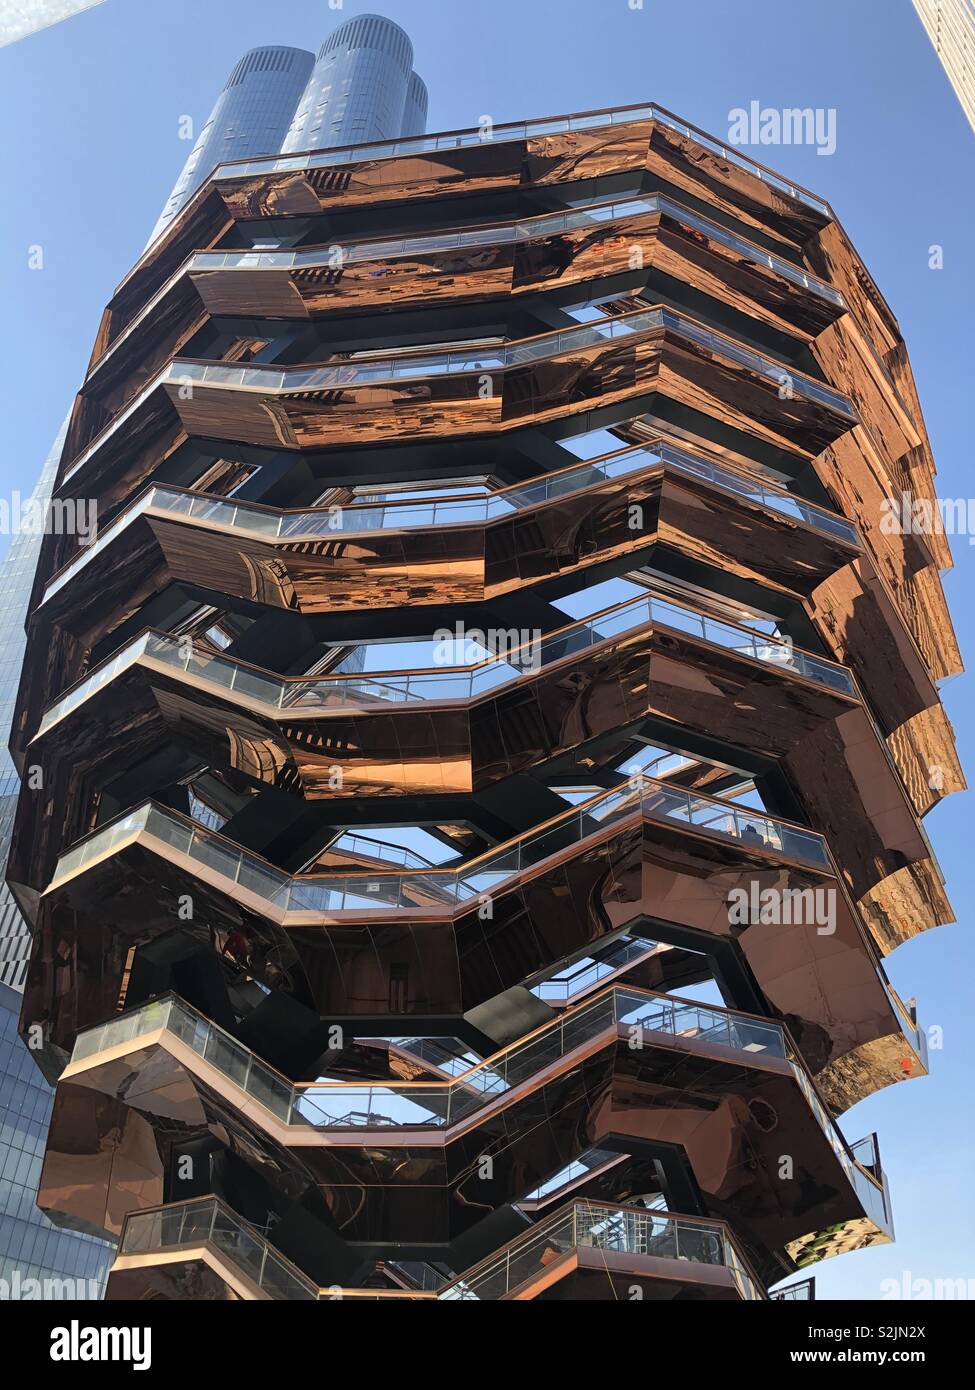 ‘The Vessel’ interactive sculpture at the heart of the new Hudson Yards neighbourhood in New York City. Designed by British architect Thomas Heatherwick. Opened on 15/3/19 Stock Photo